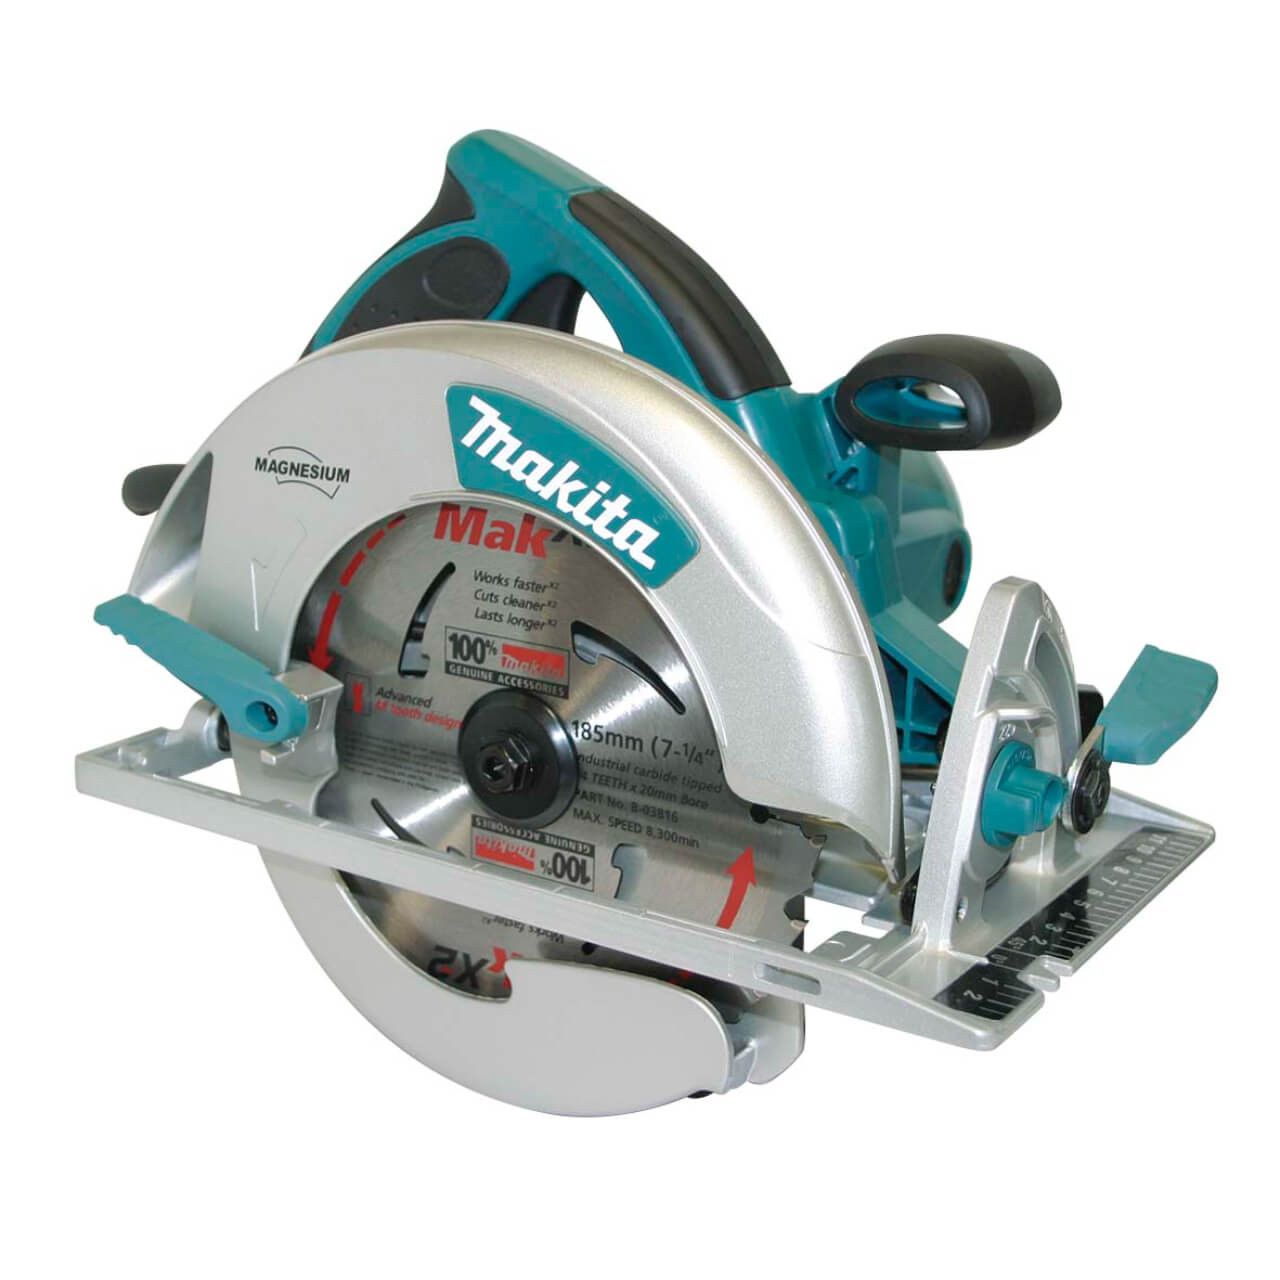 Makita 185mm (7-1/4”) Circular Saw. 1.800W. magnesium base with Carry case